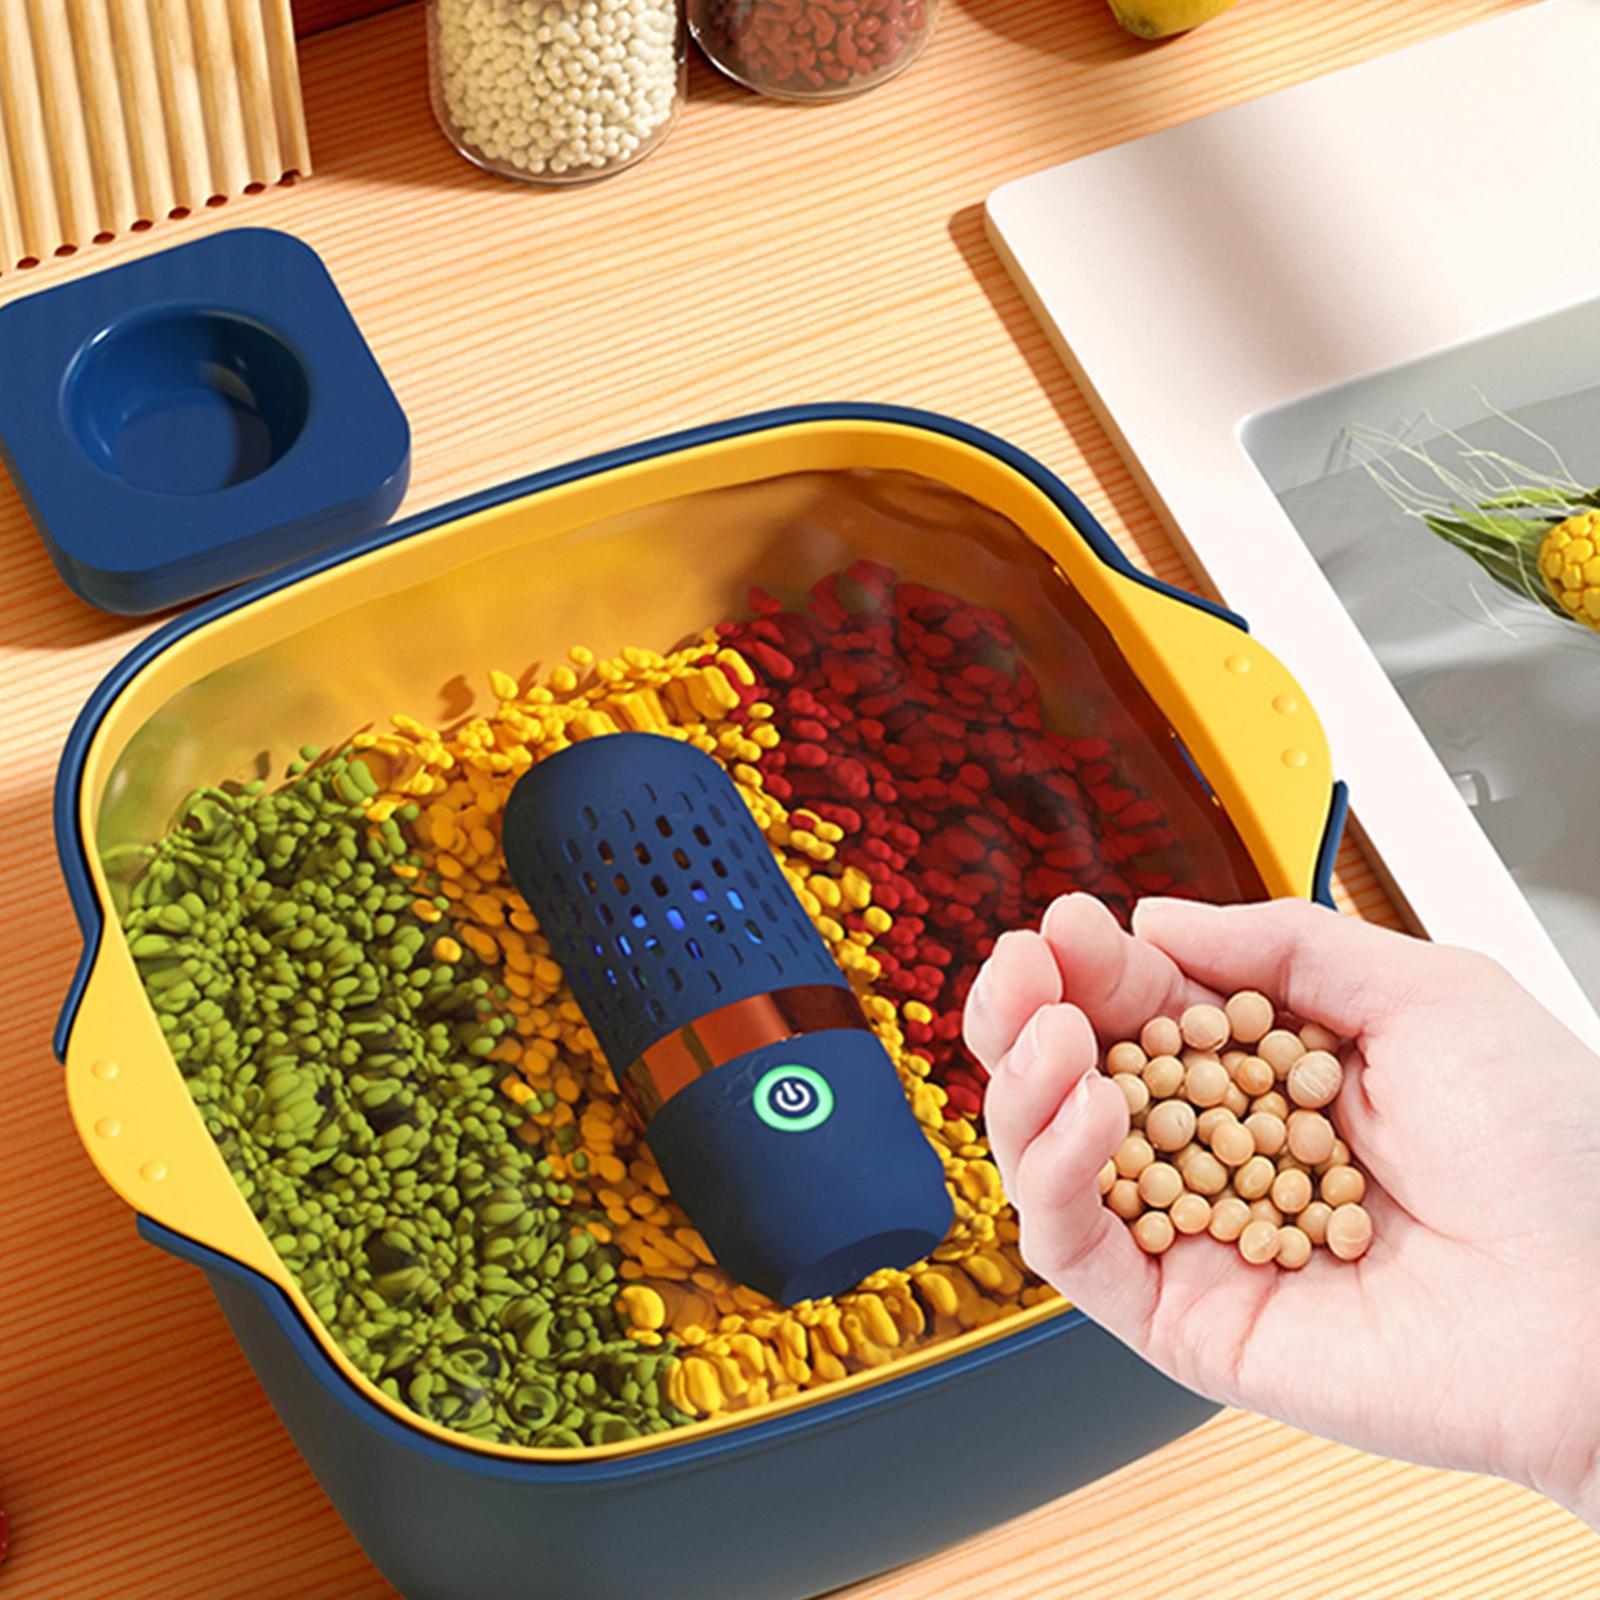 Portable USB Rechargeable Wireless Food Purifier